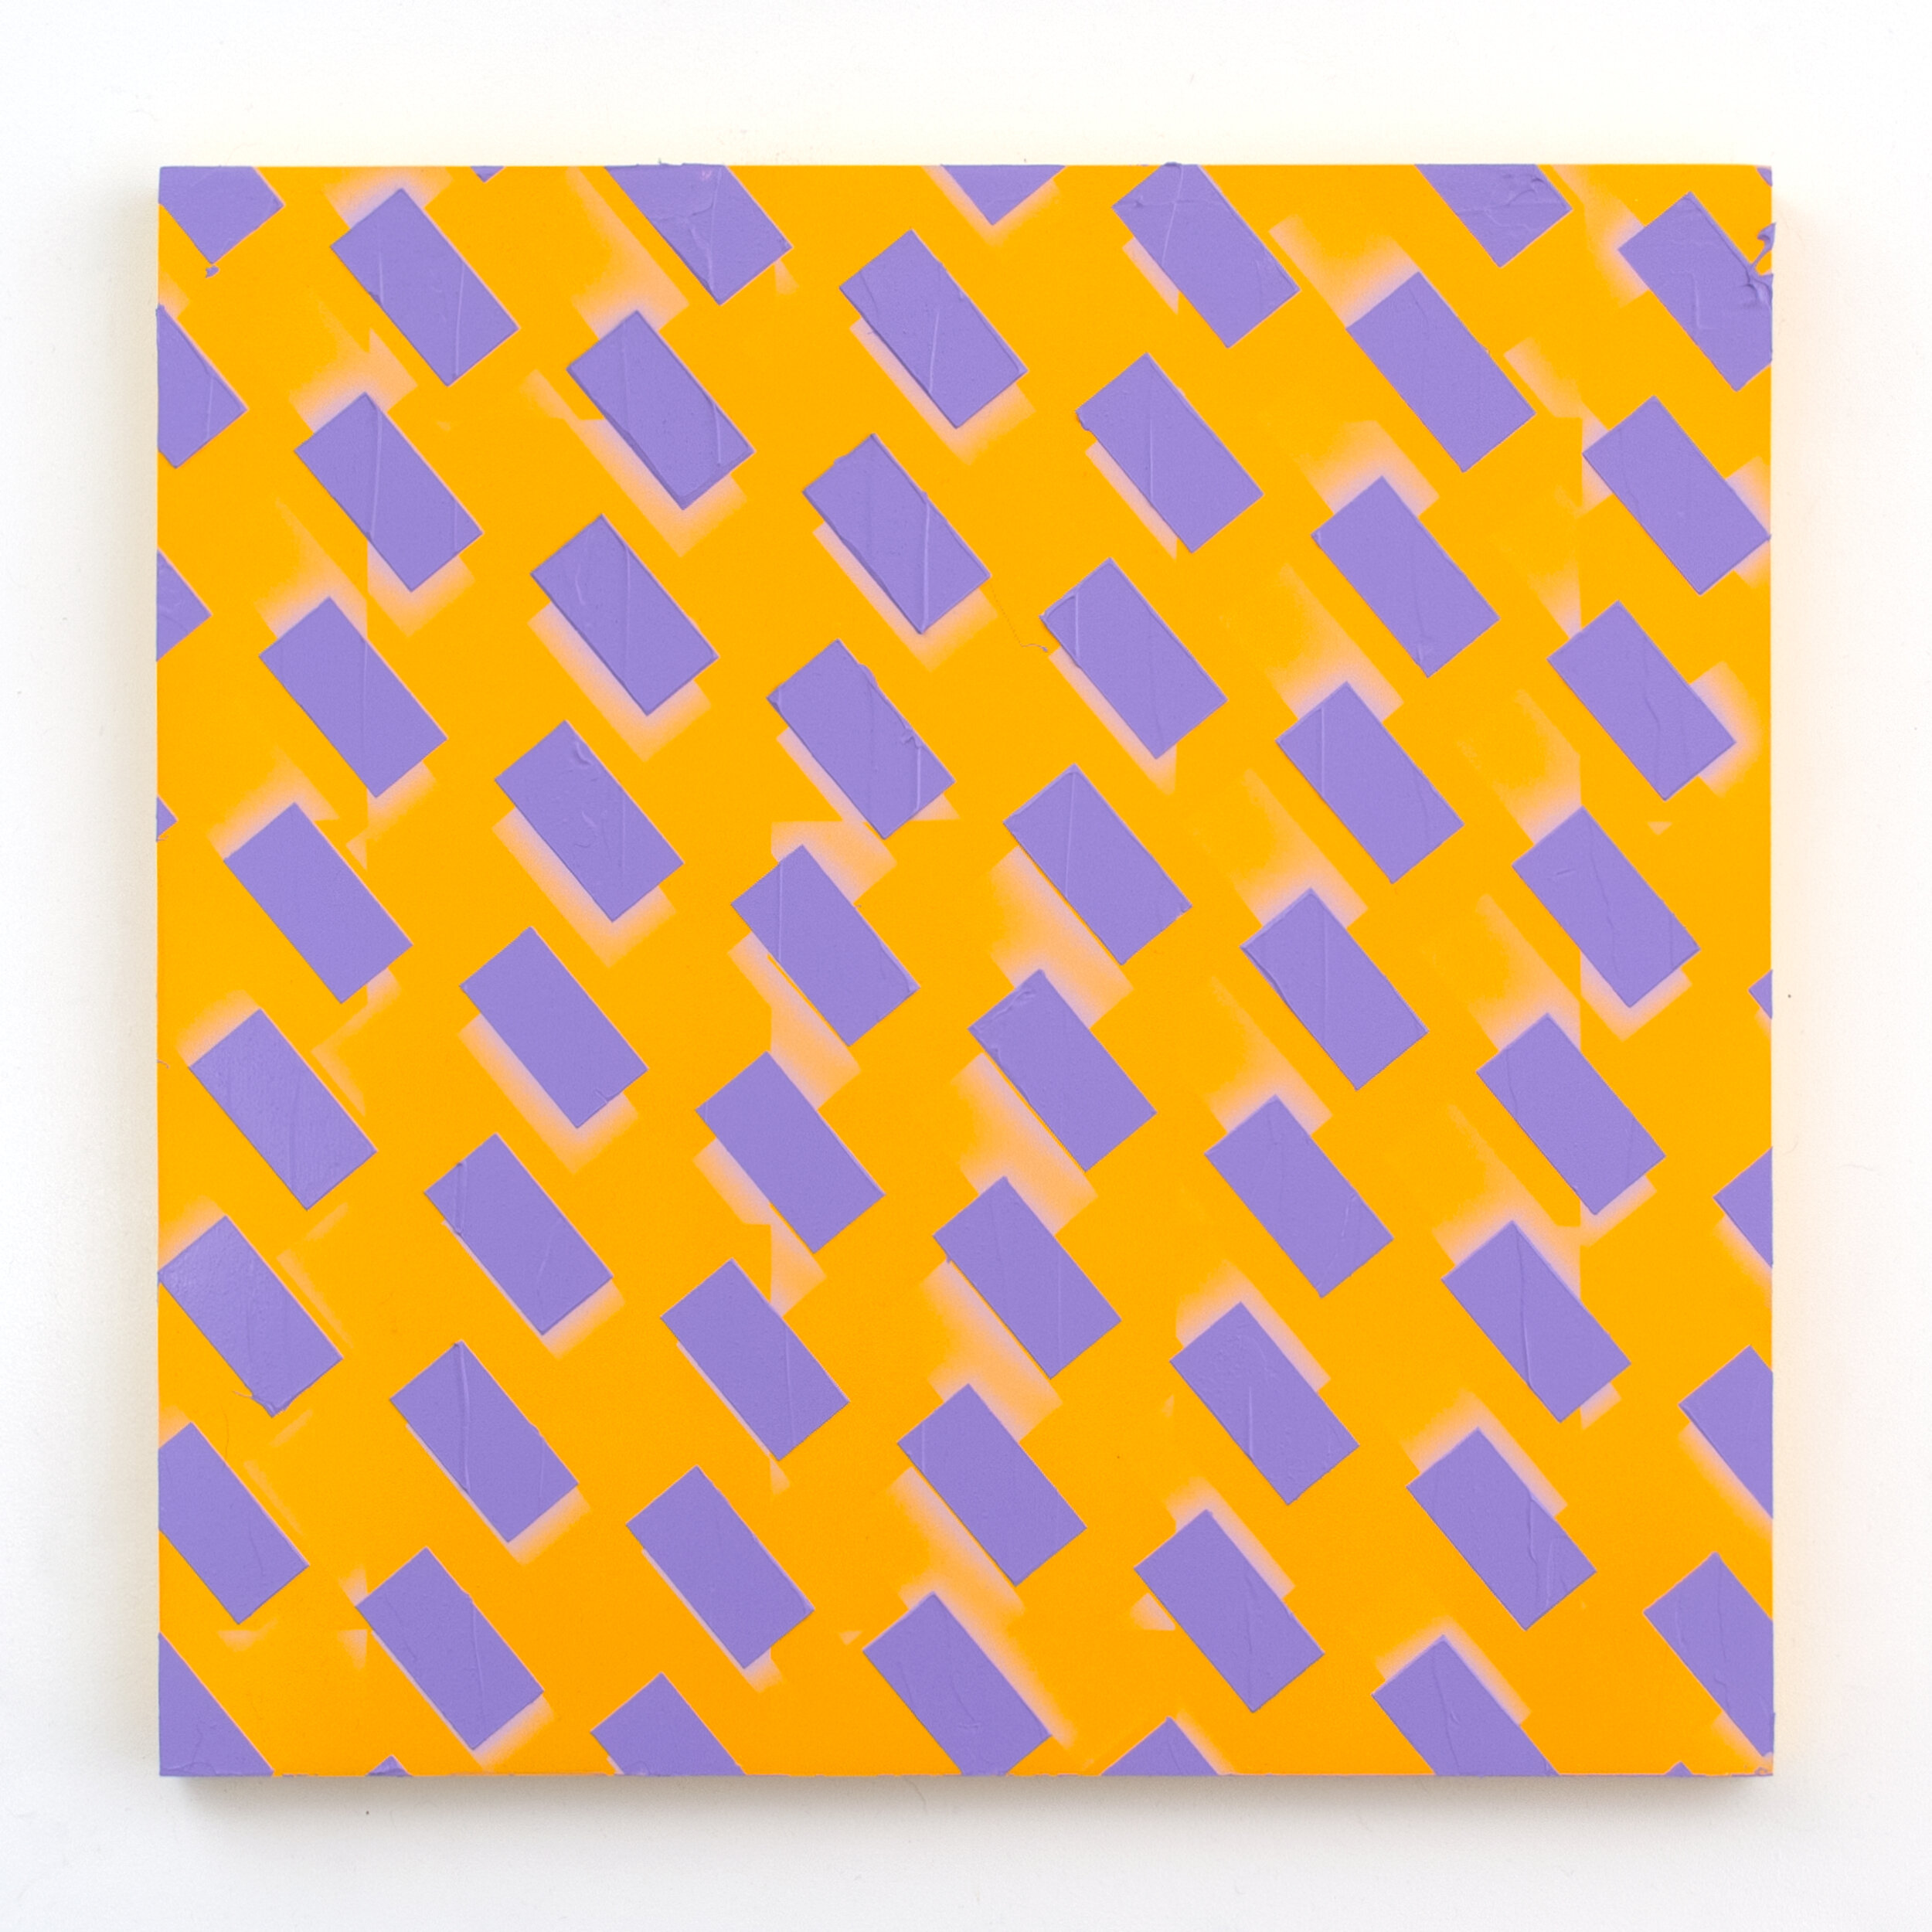 (untitled - blurry and extruded rectangle patterns)